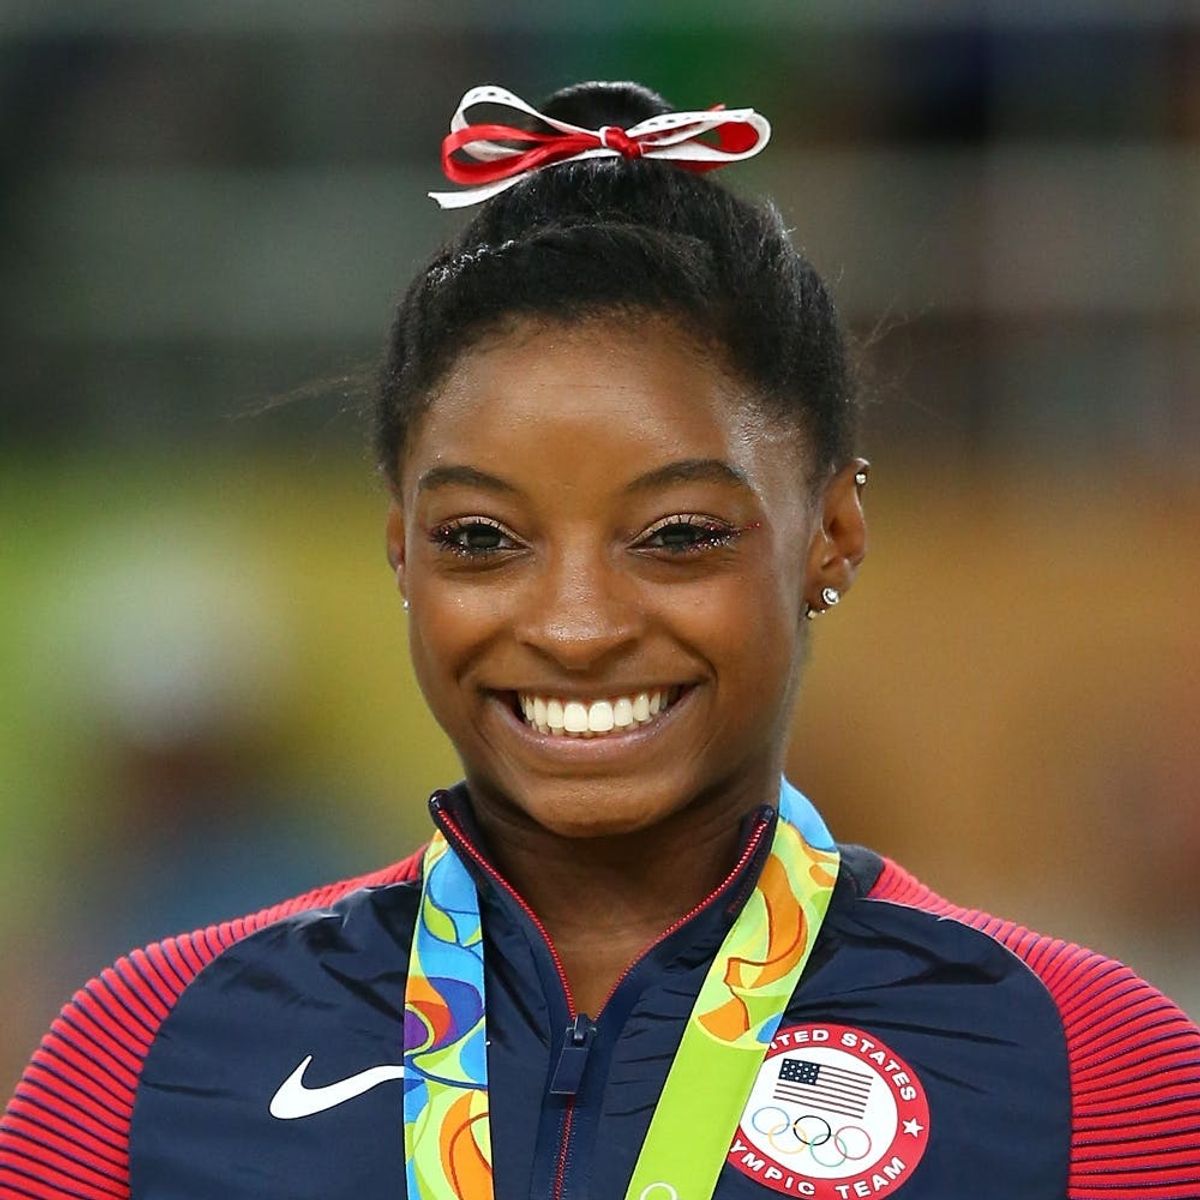 There’s a Love Triangle Happening Between Simone Biles, Zac Efron and Her Olympic BF